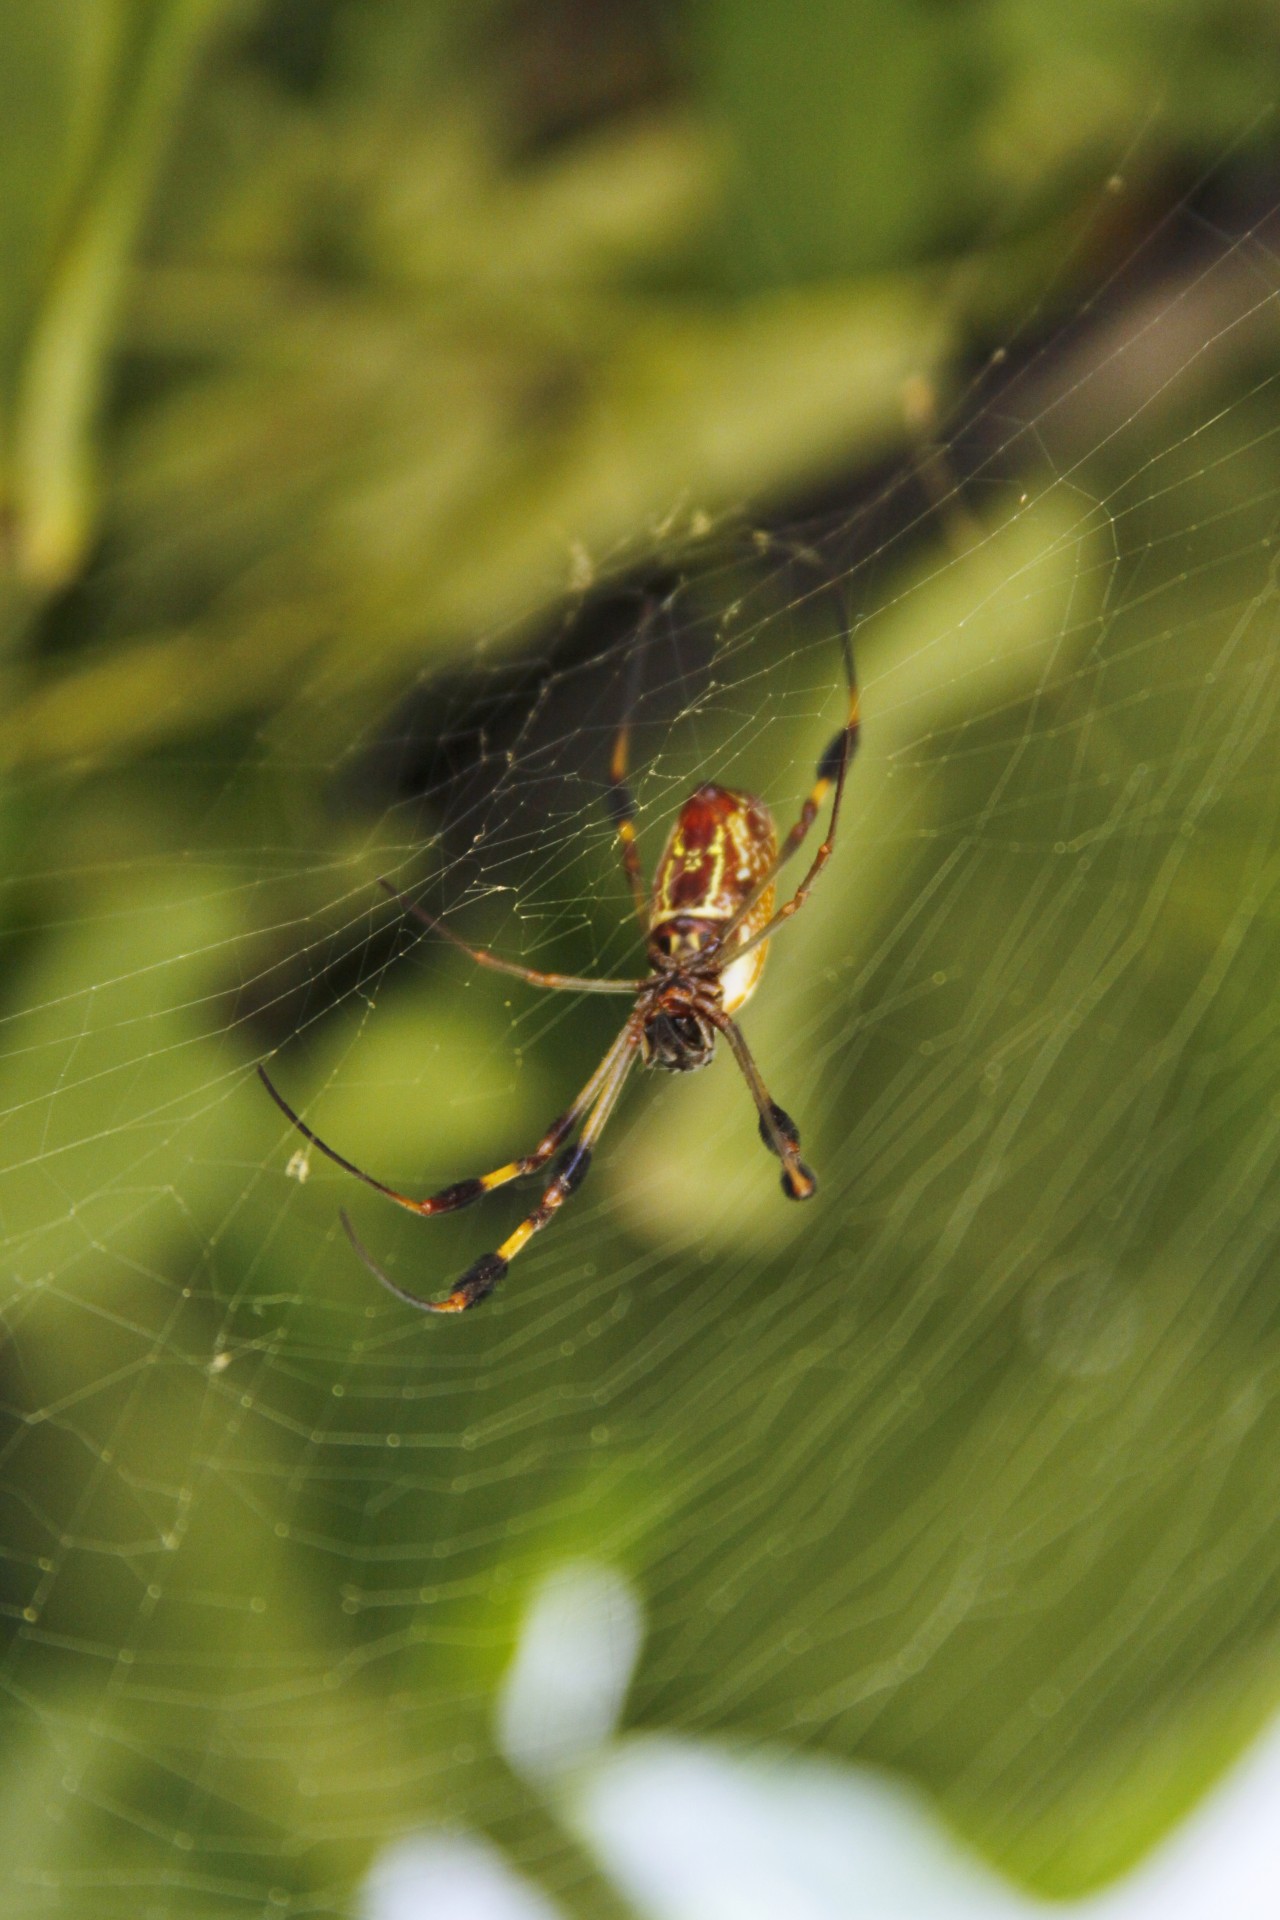 Black & Yellow Spider On A Web